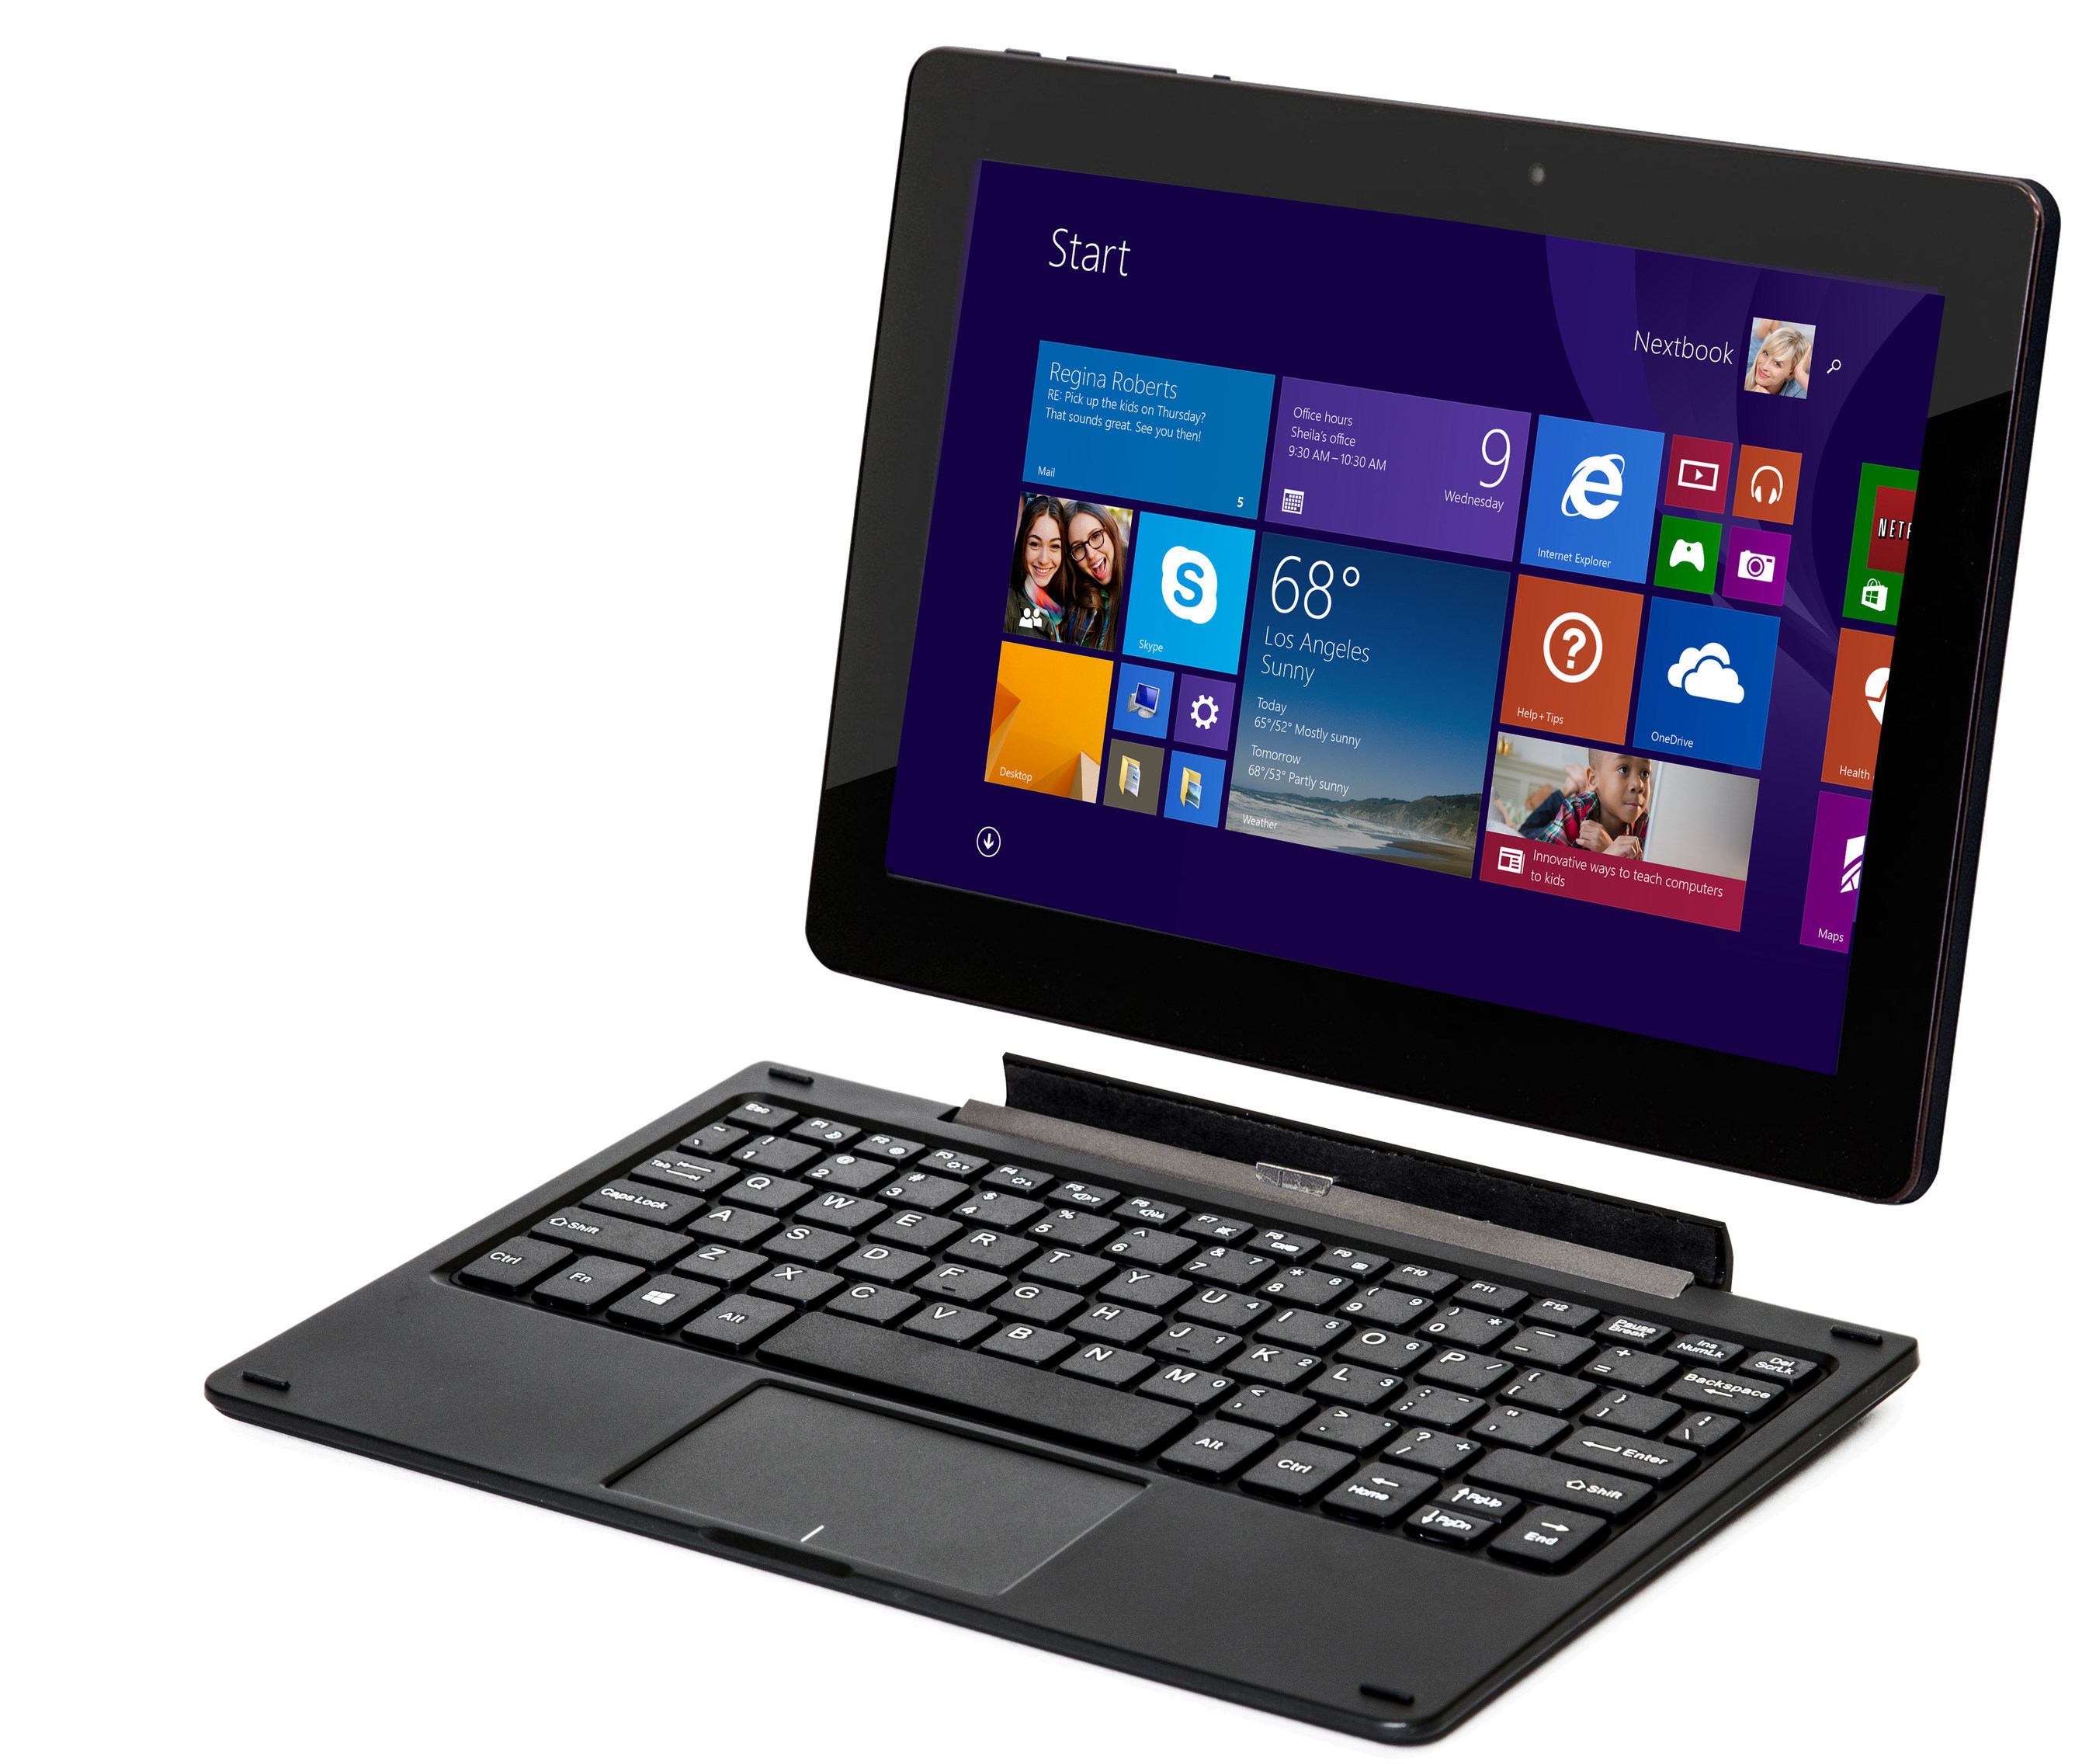 E FUN Introduces New Nextbook 10 2-in-1 Windows Tablet